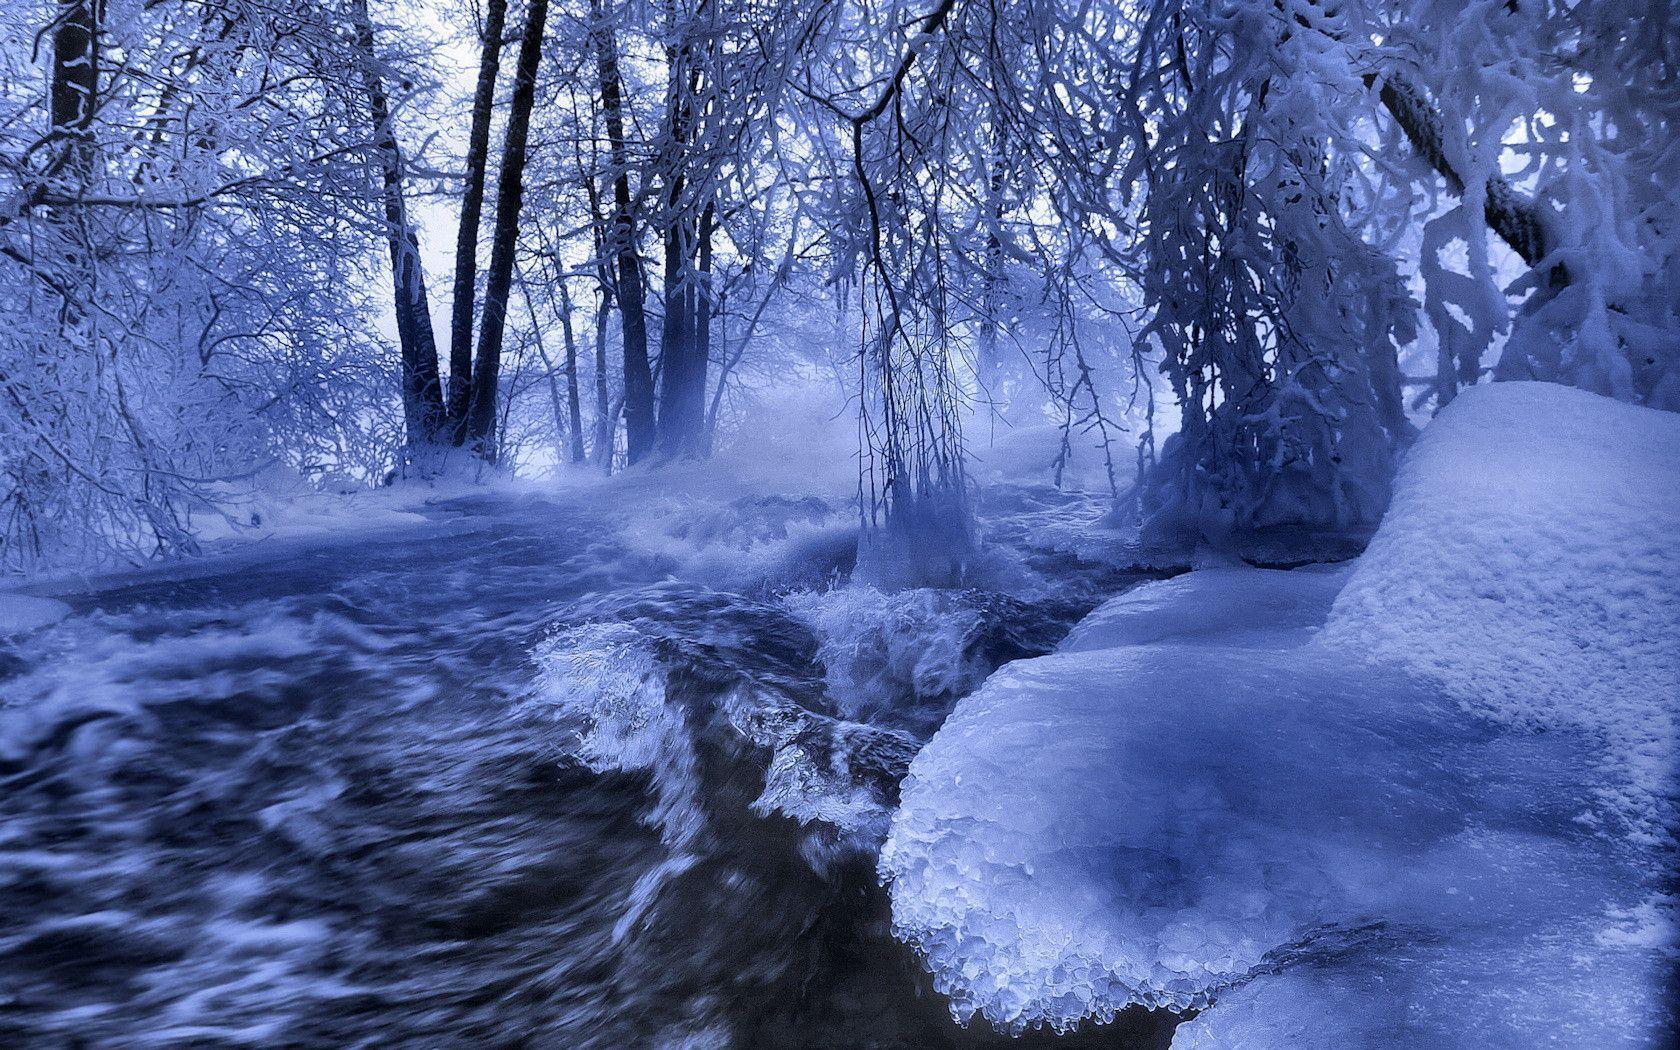 Winter Nature Scenes Wallpapers 23225 Hd Wallpapers in Nature